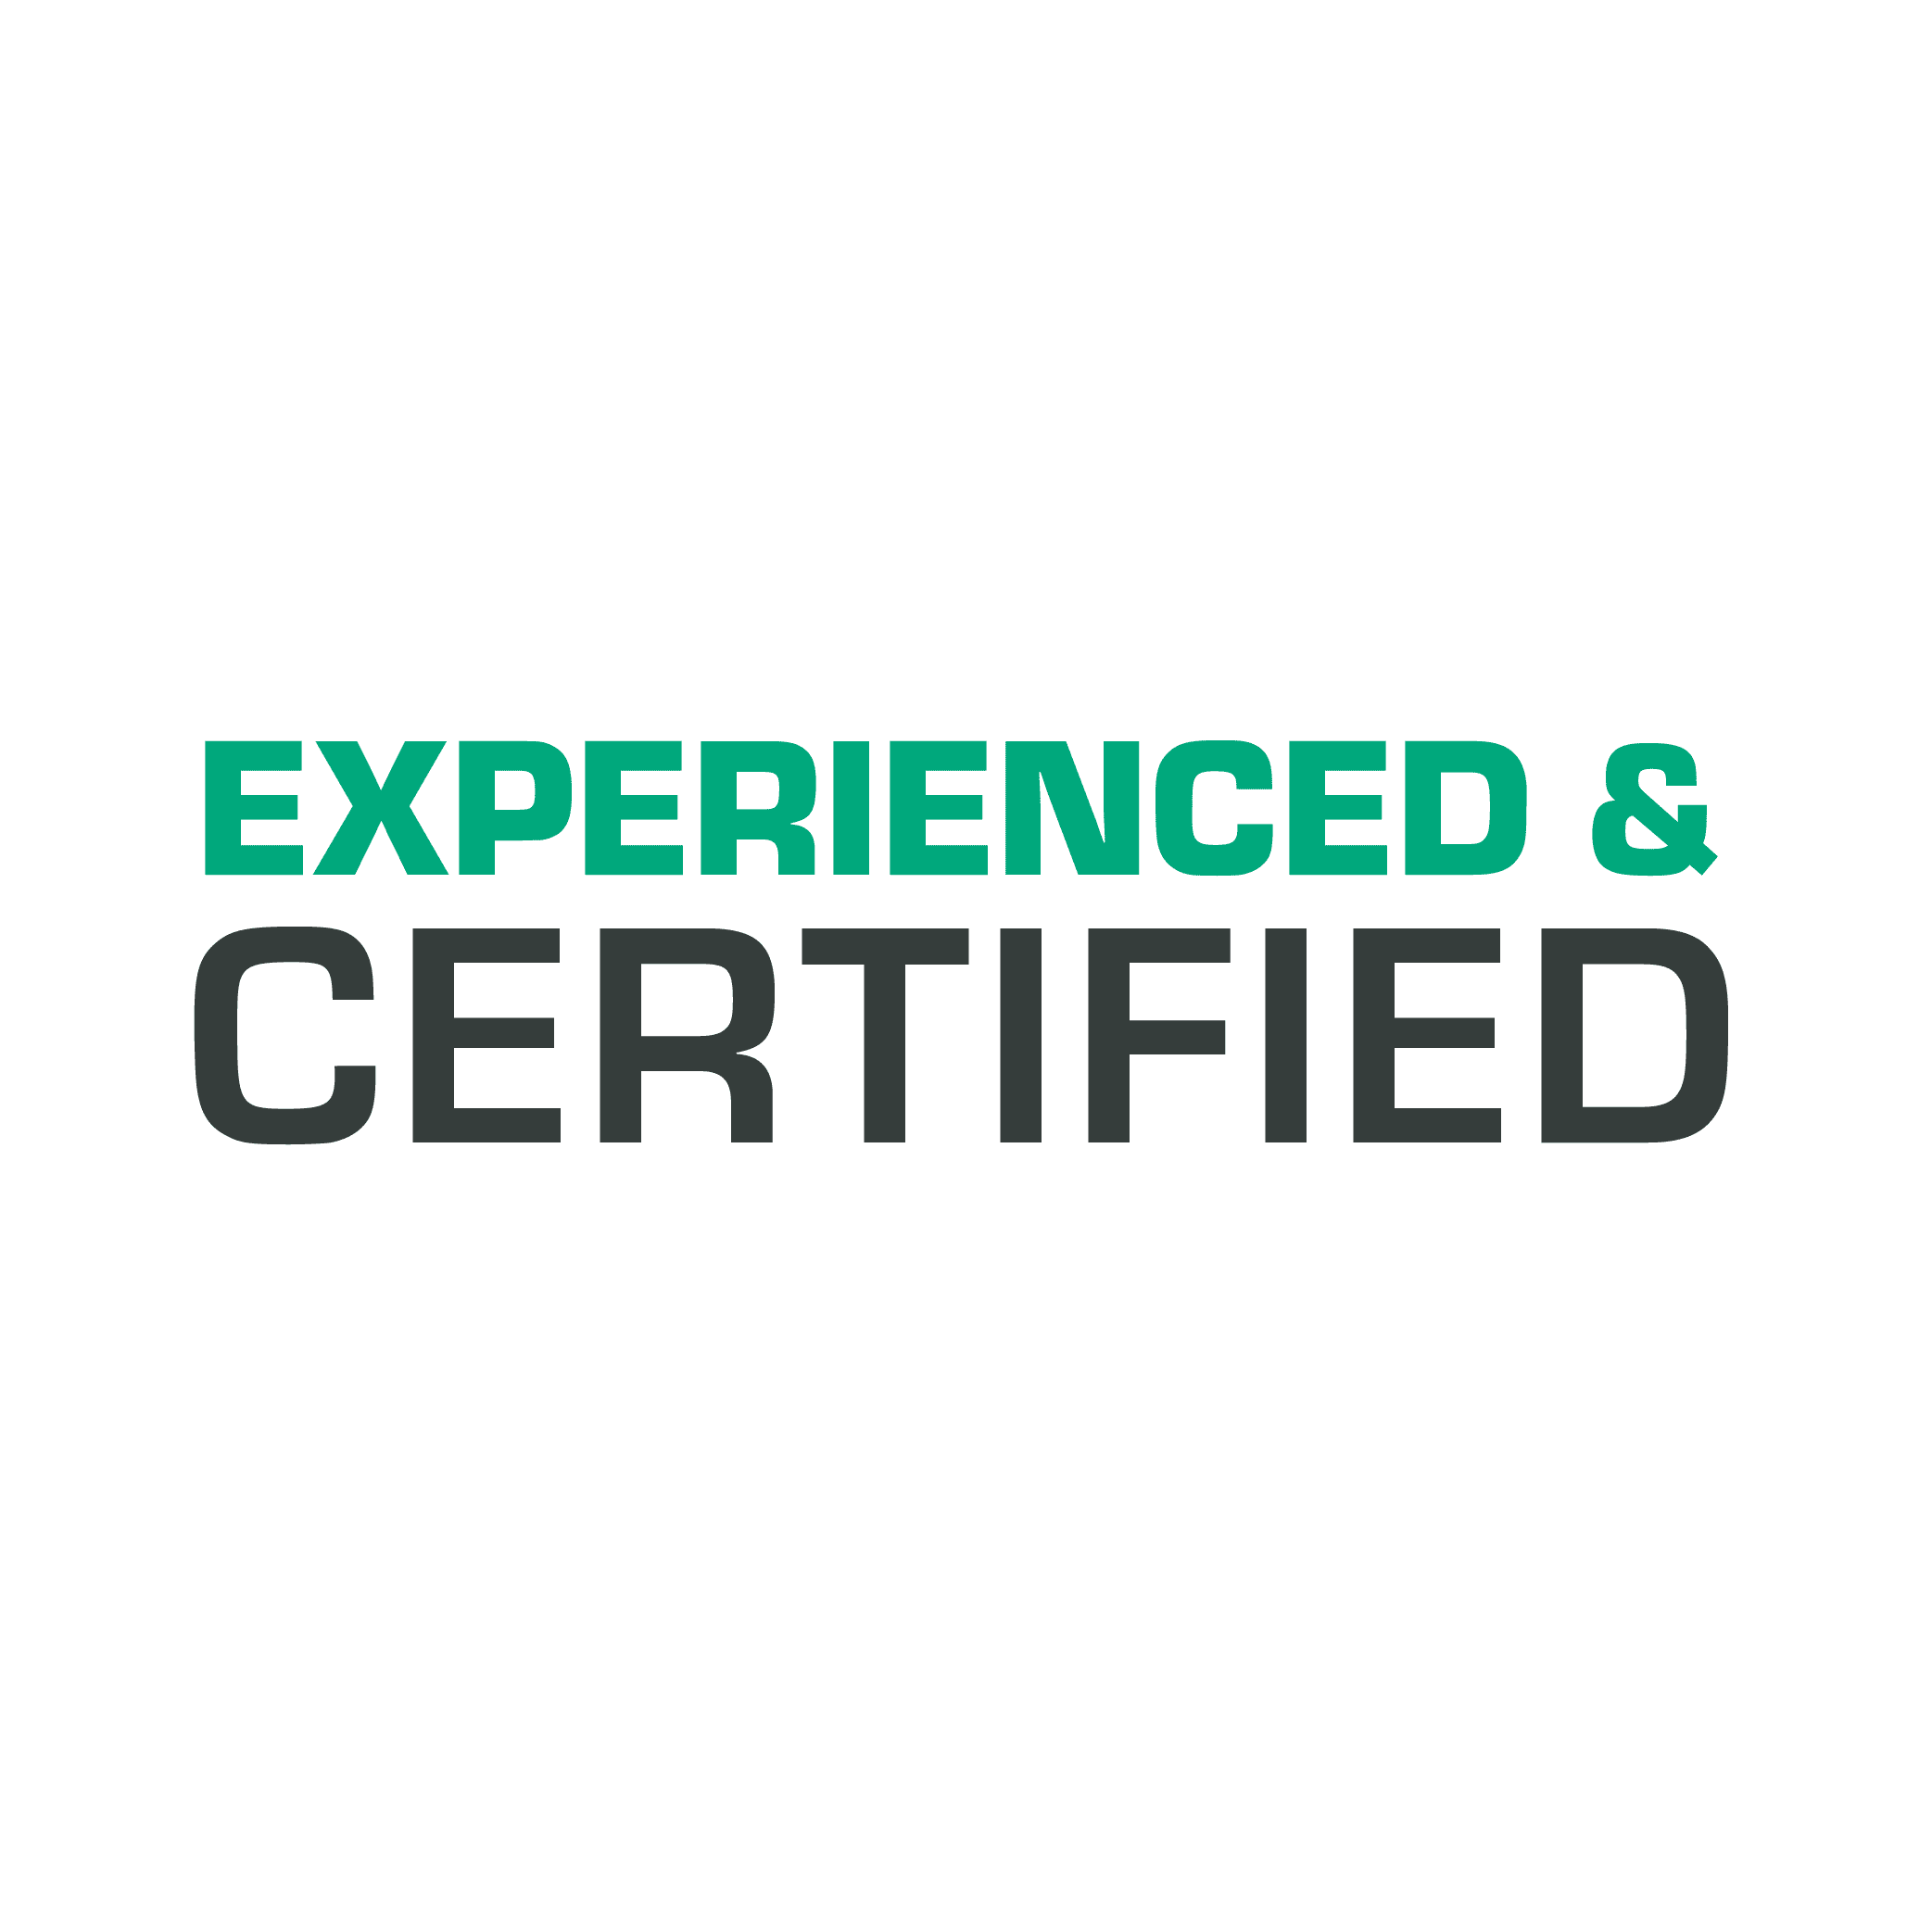 Experienced and certified